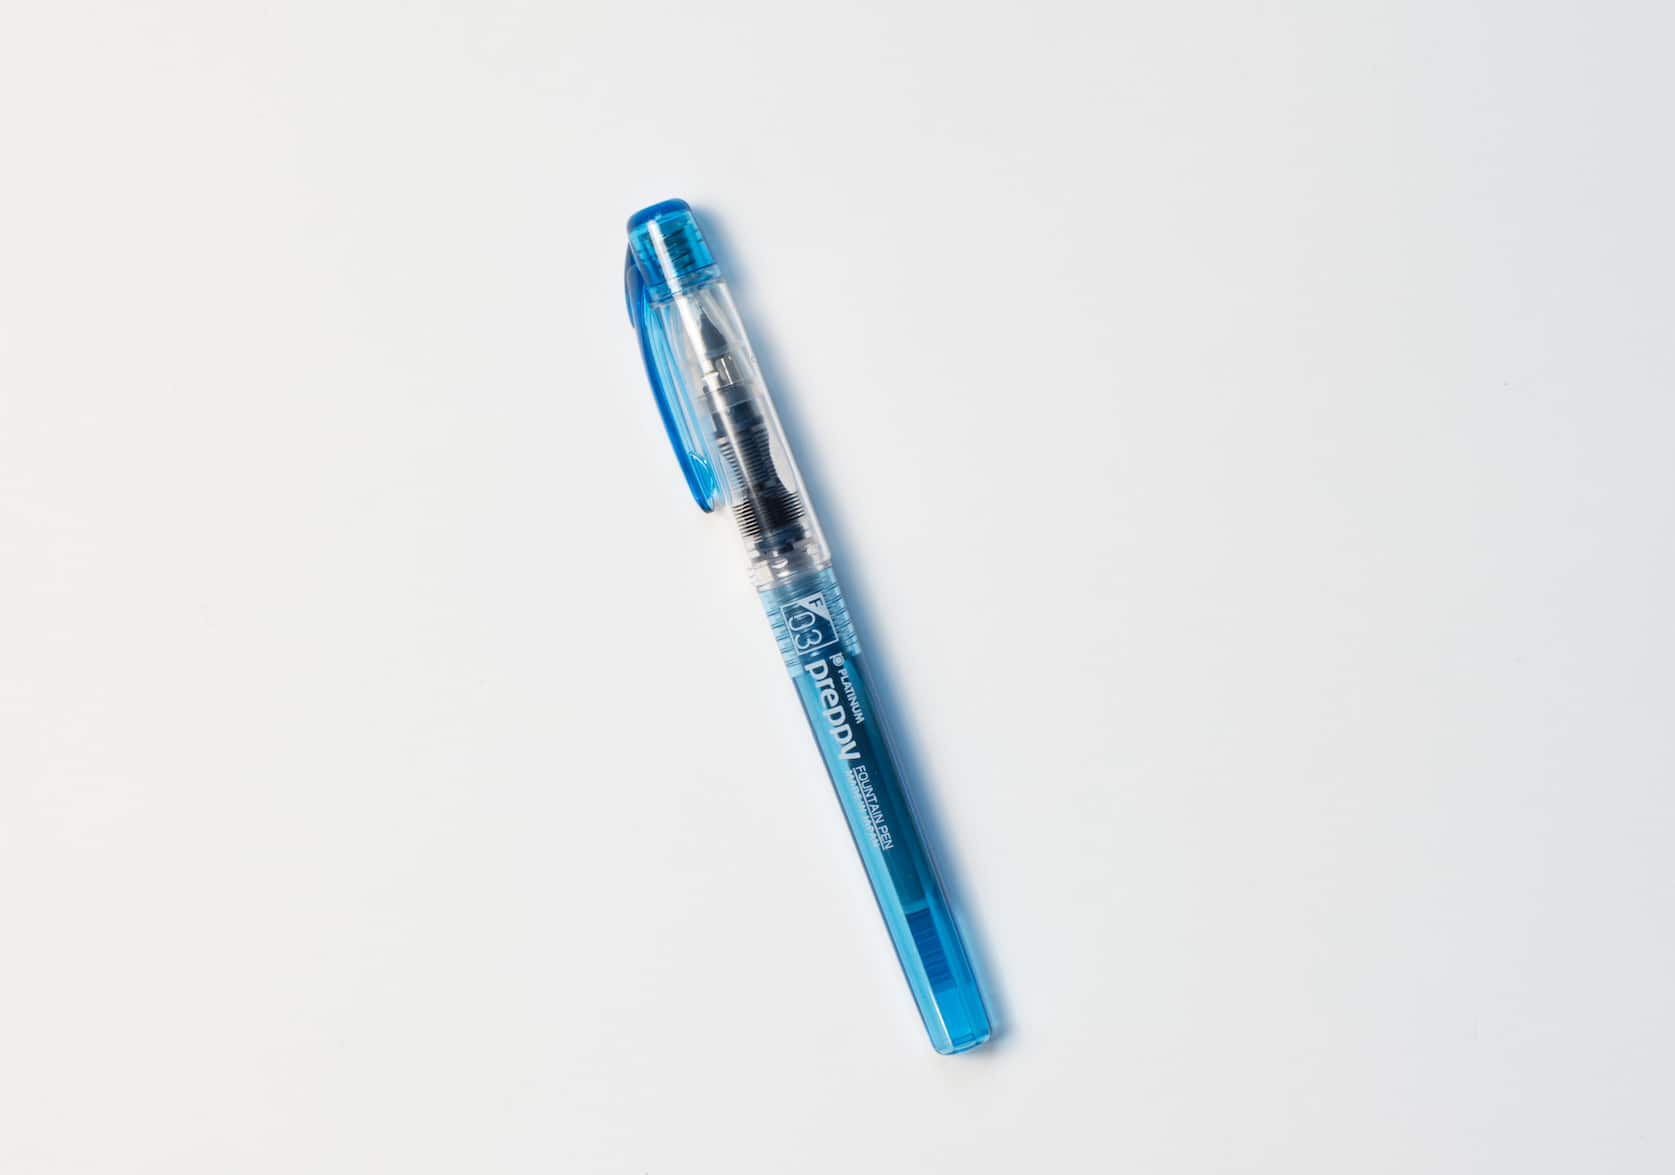 Fountain pen with a blue black barrel and pen clip. White text reads: Preppy